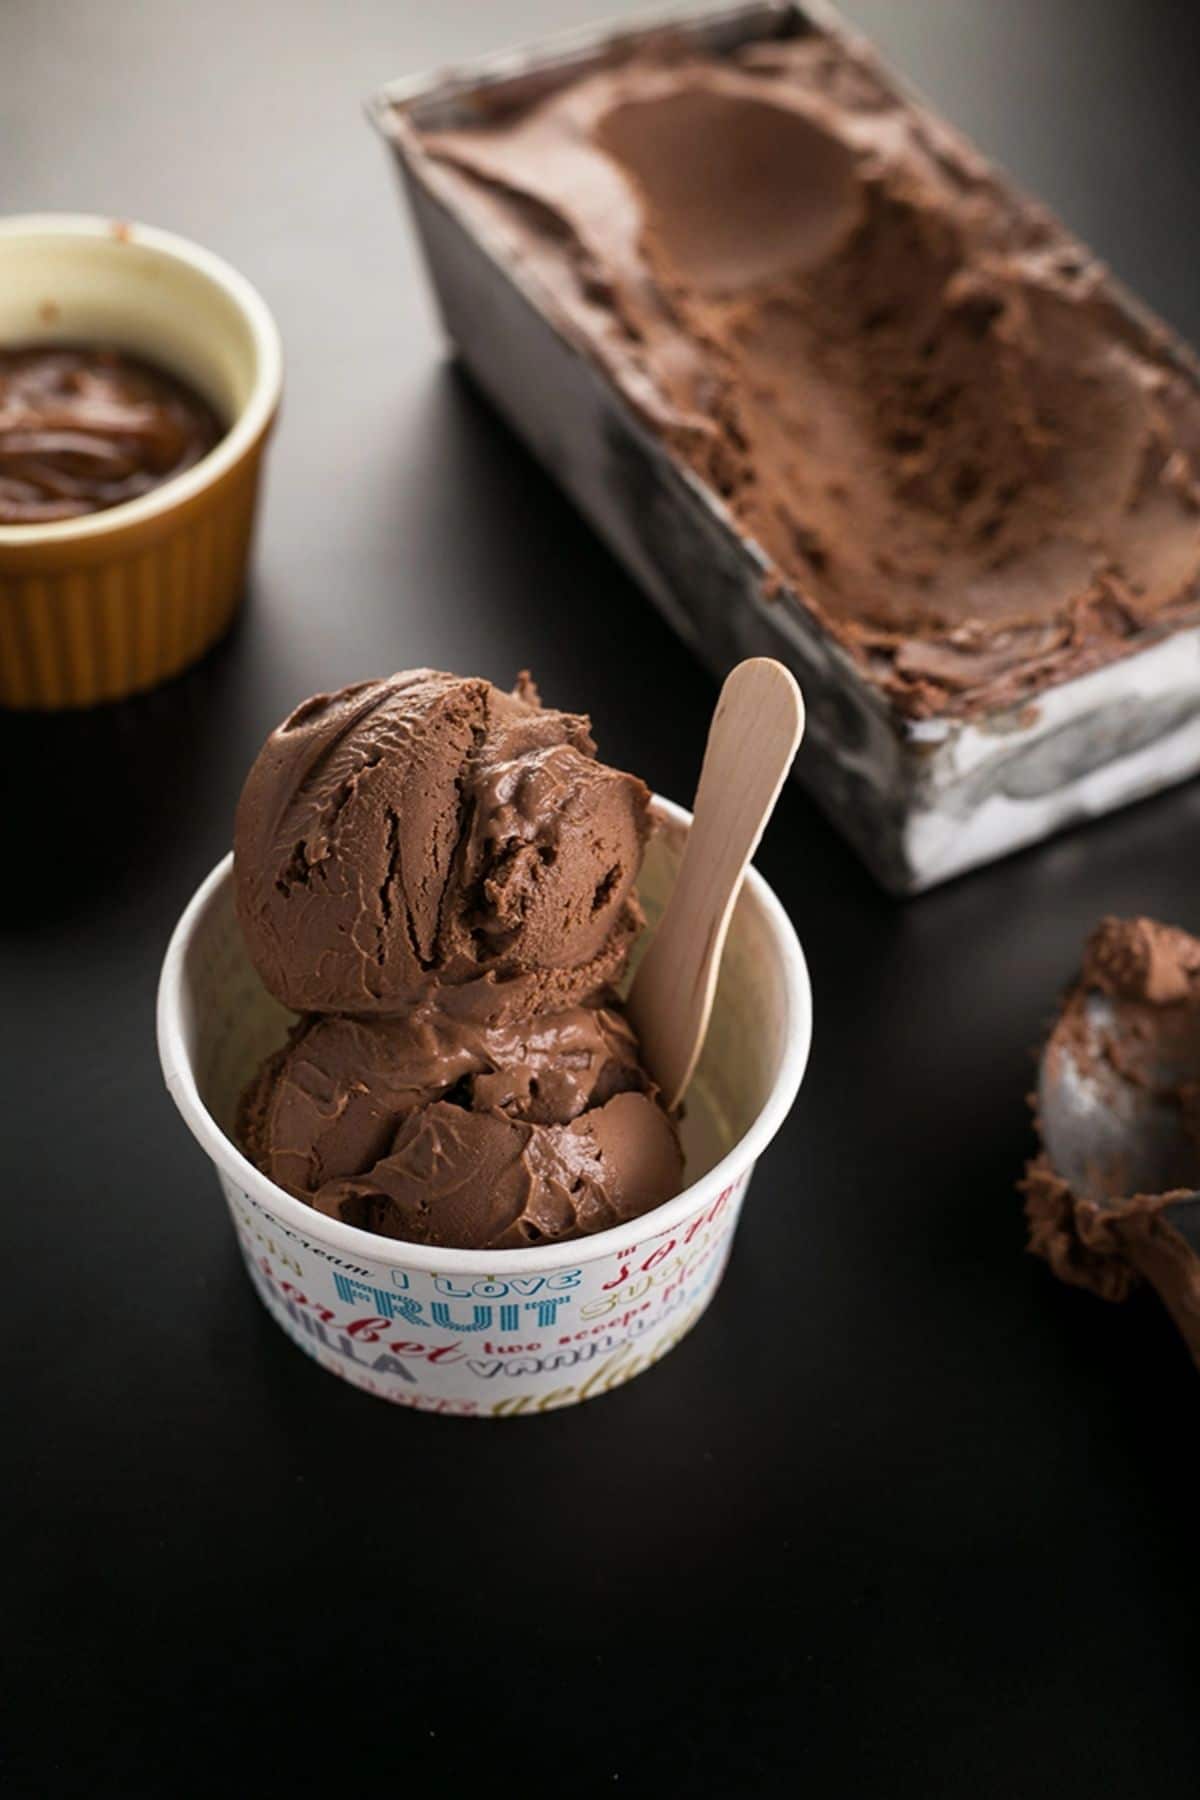 a paper cup filled with vegan chocolate ice cream with a wooden spoon sticking in it. in the background is a metal tray of ice cream